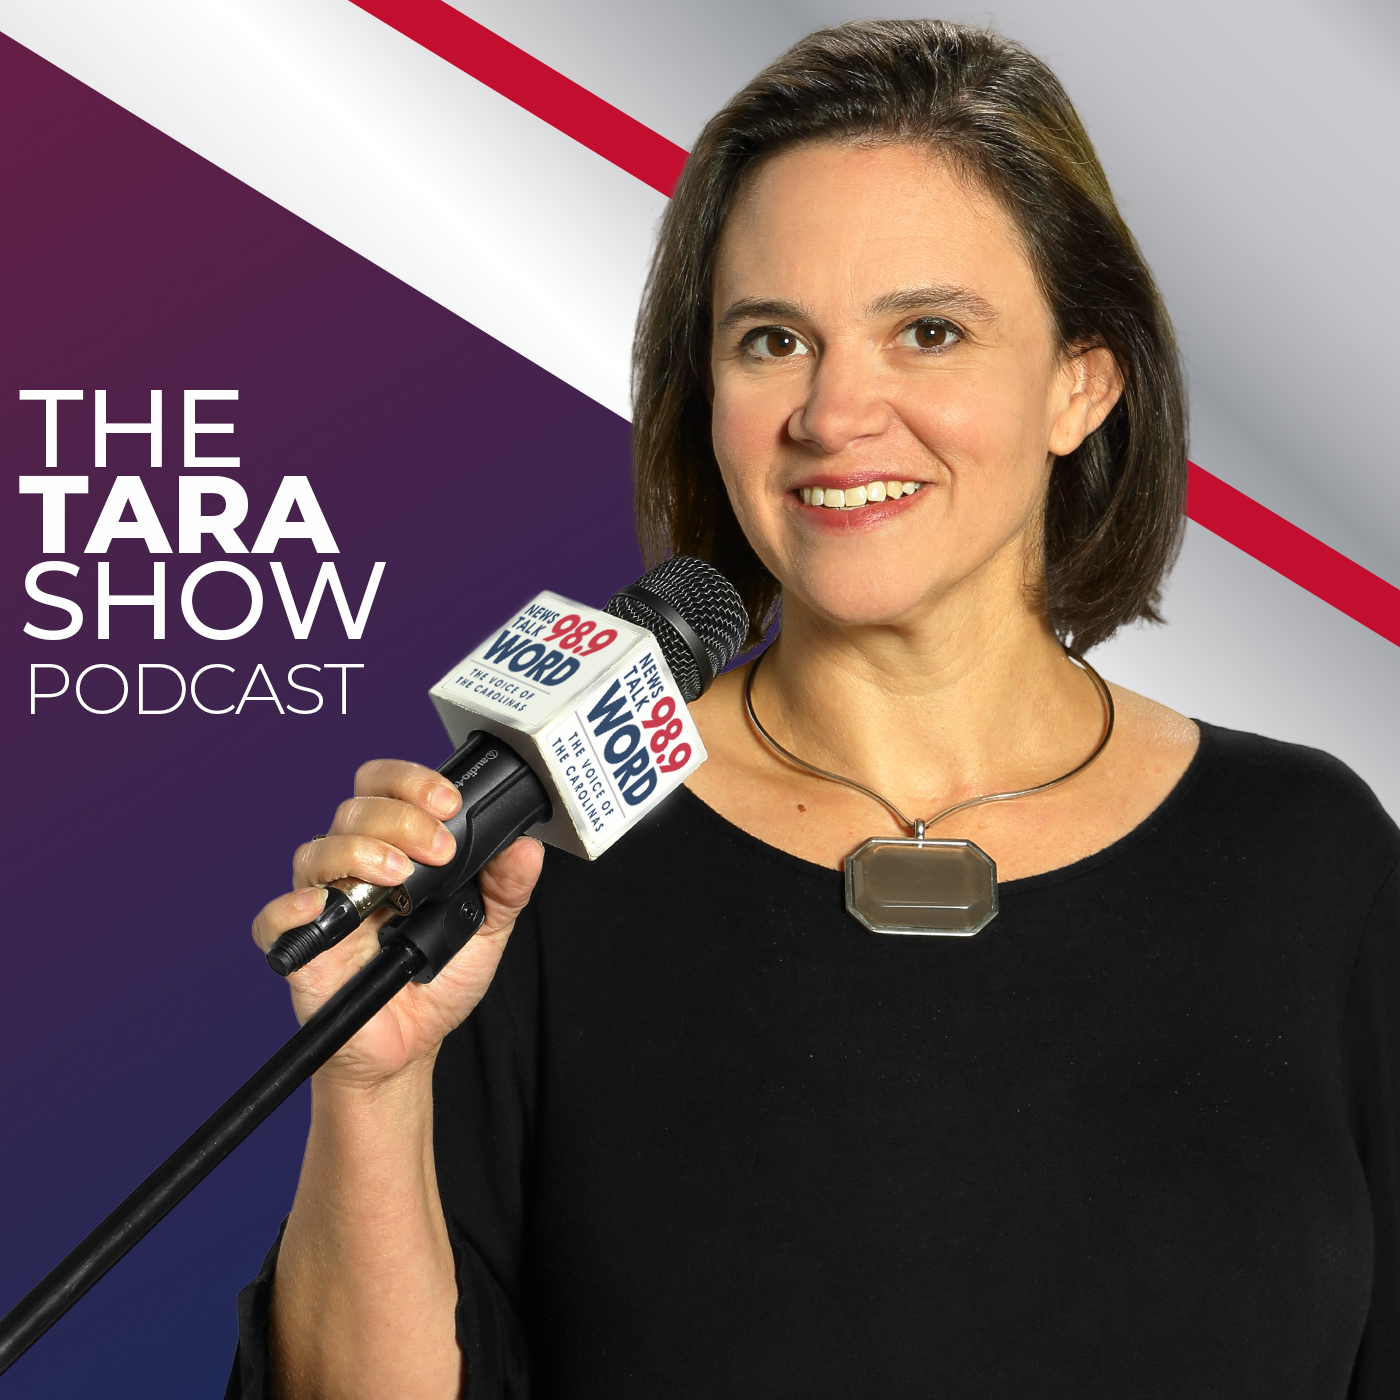 Hour 4: The Tara Show - “Who will be Trump's VP Pick?” “Callers React to Trump's Assassanation Attempt” “The Focus of the Head of Secret Service” “The Same Sad Story The Shooter”